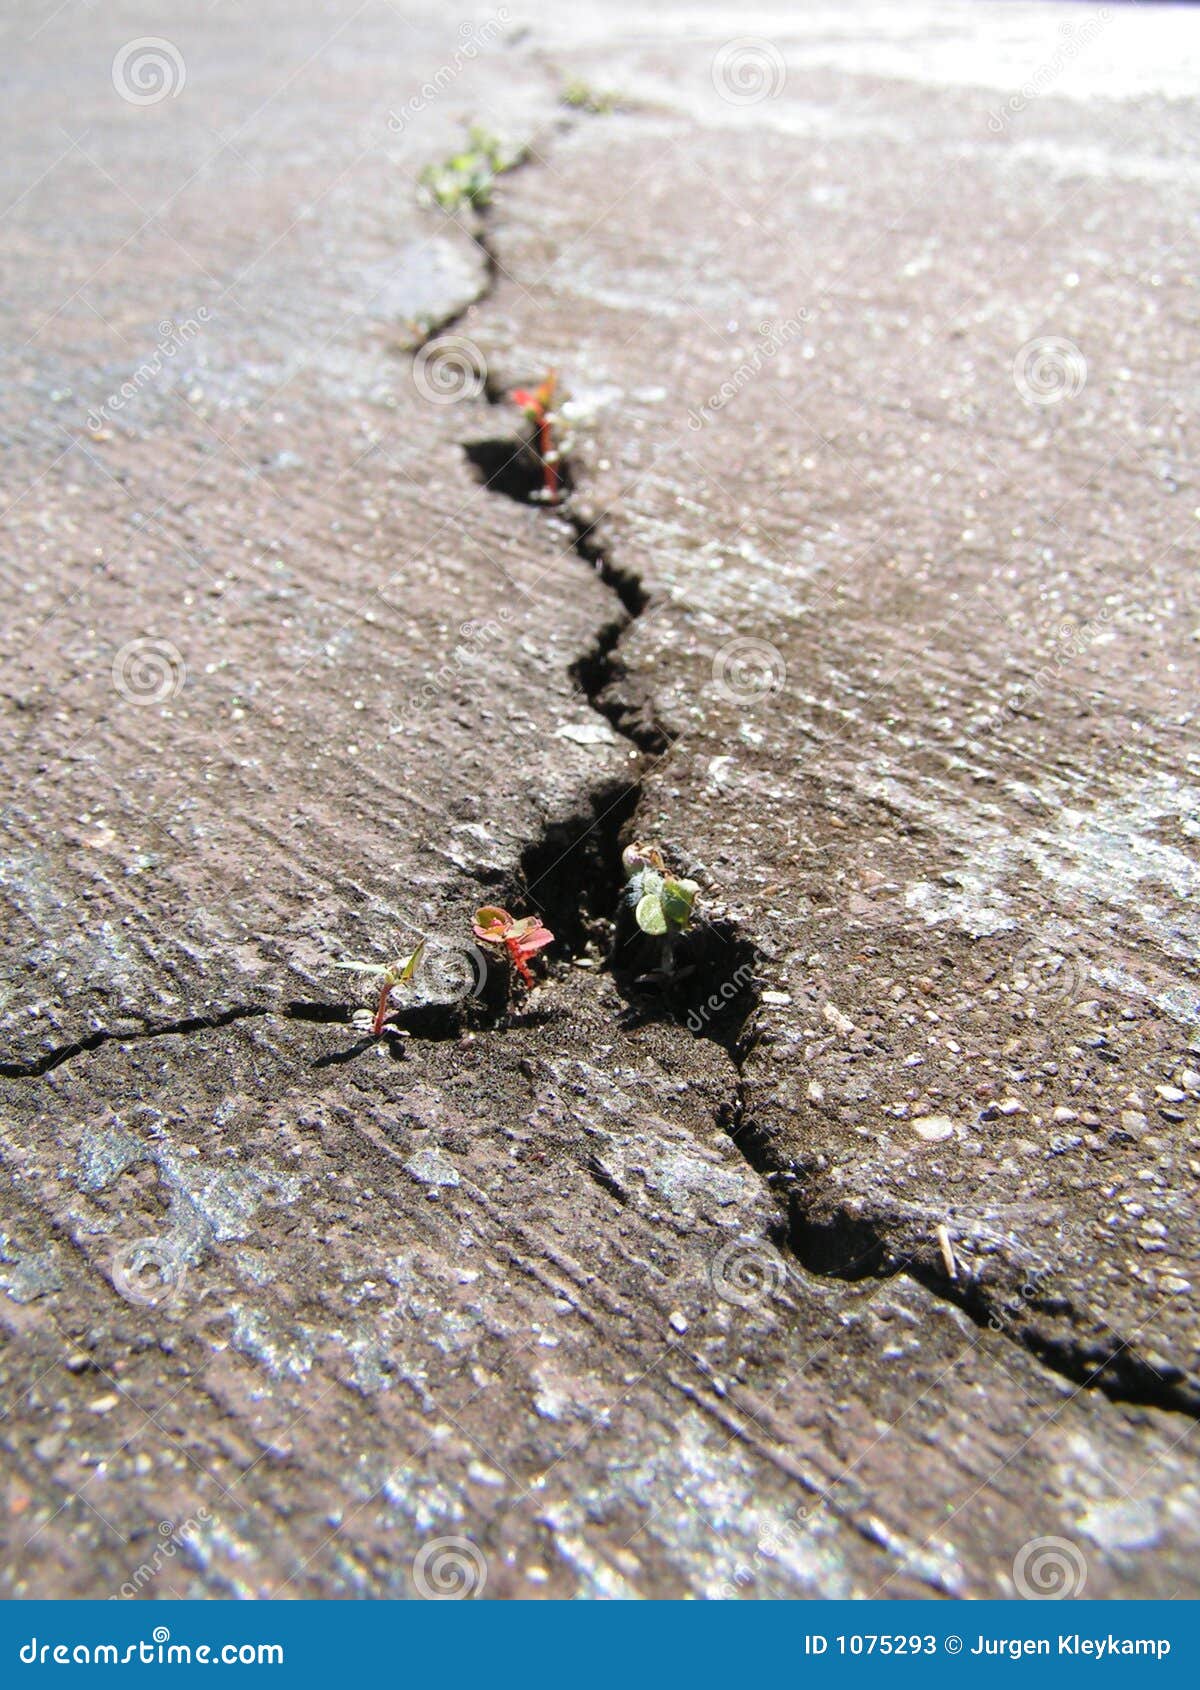 cracked road with new life